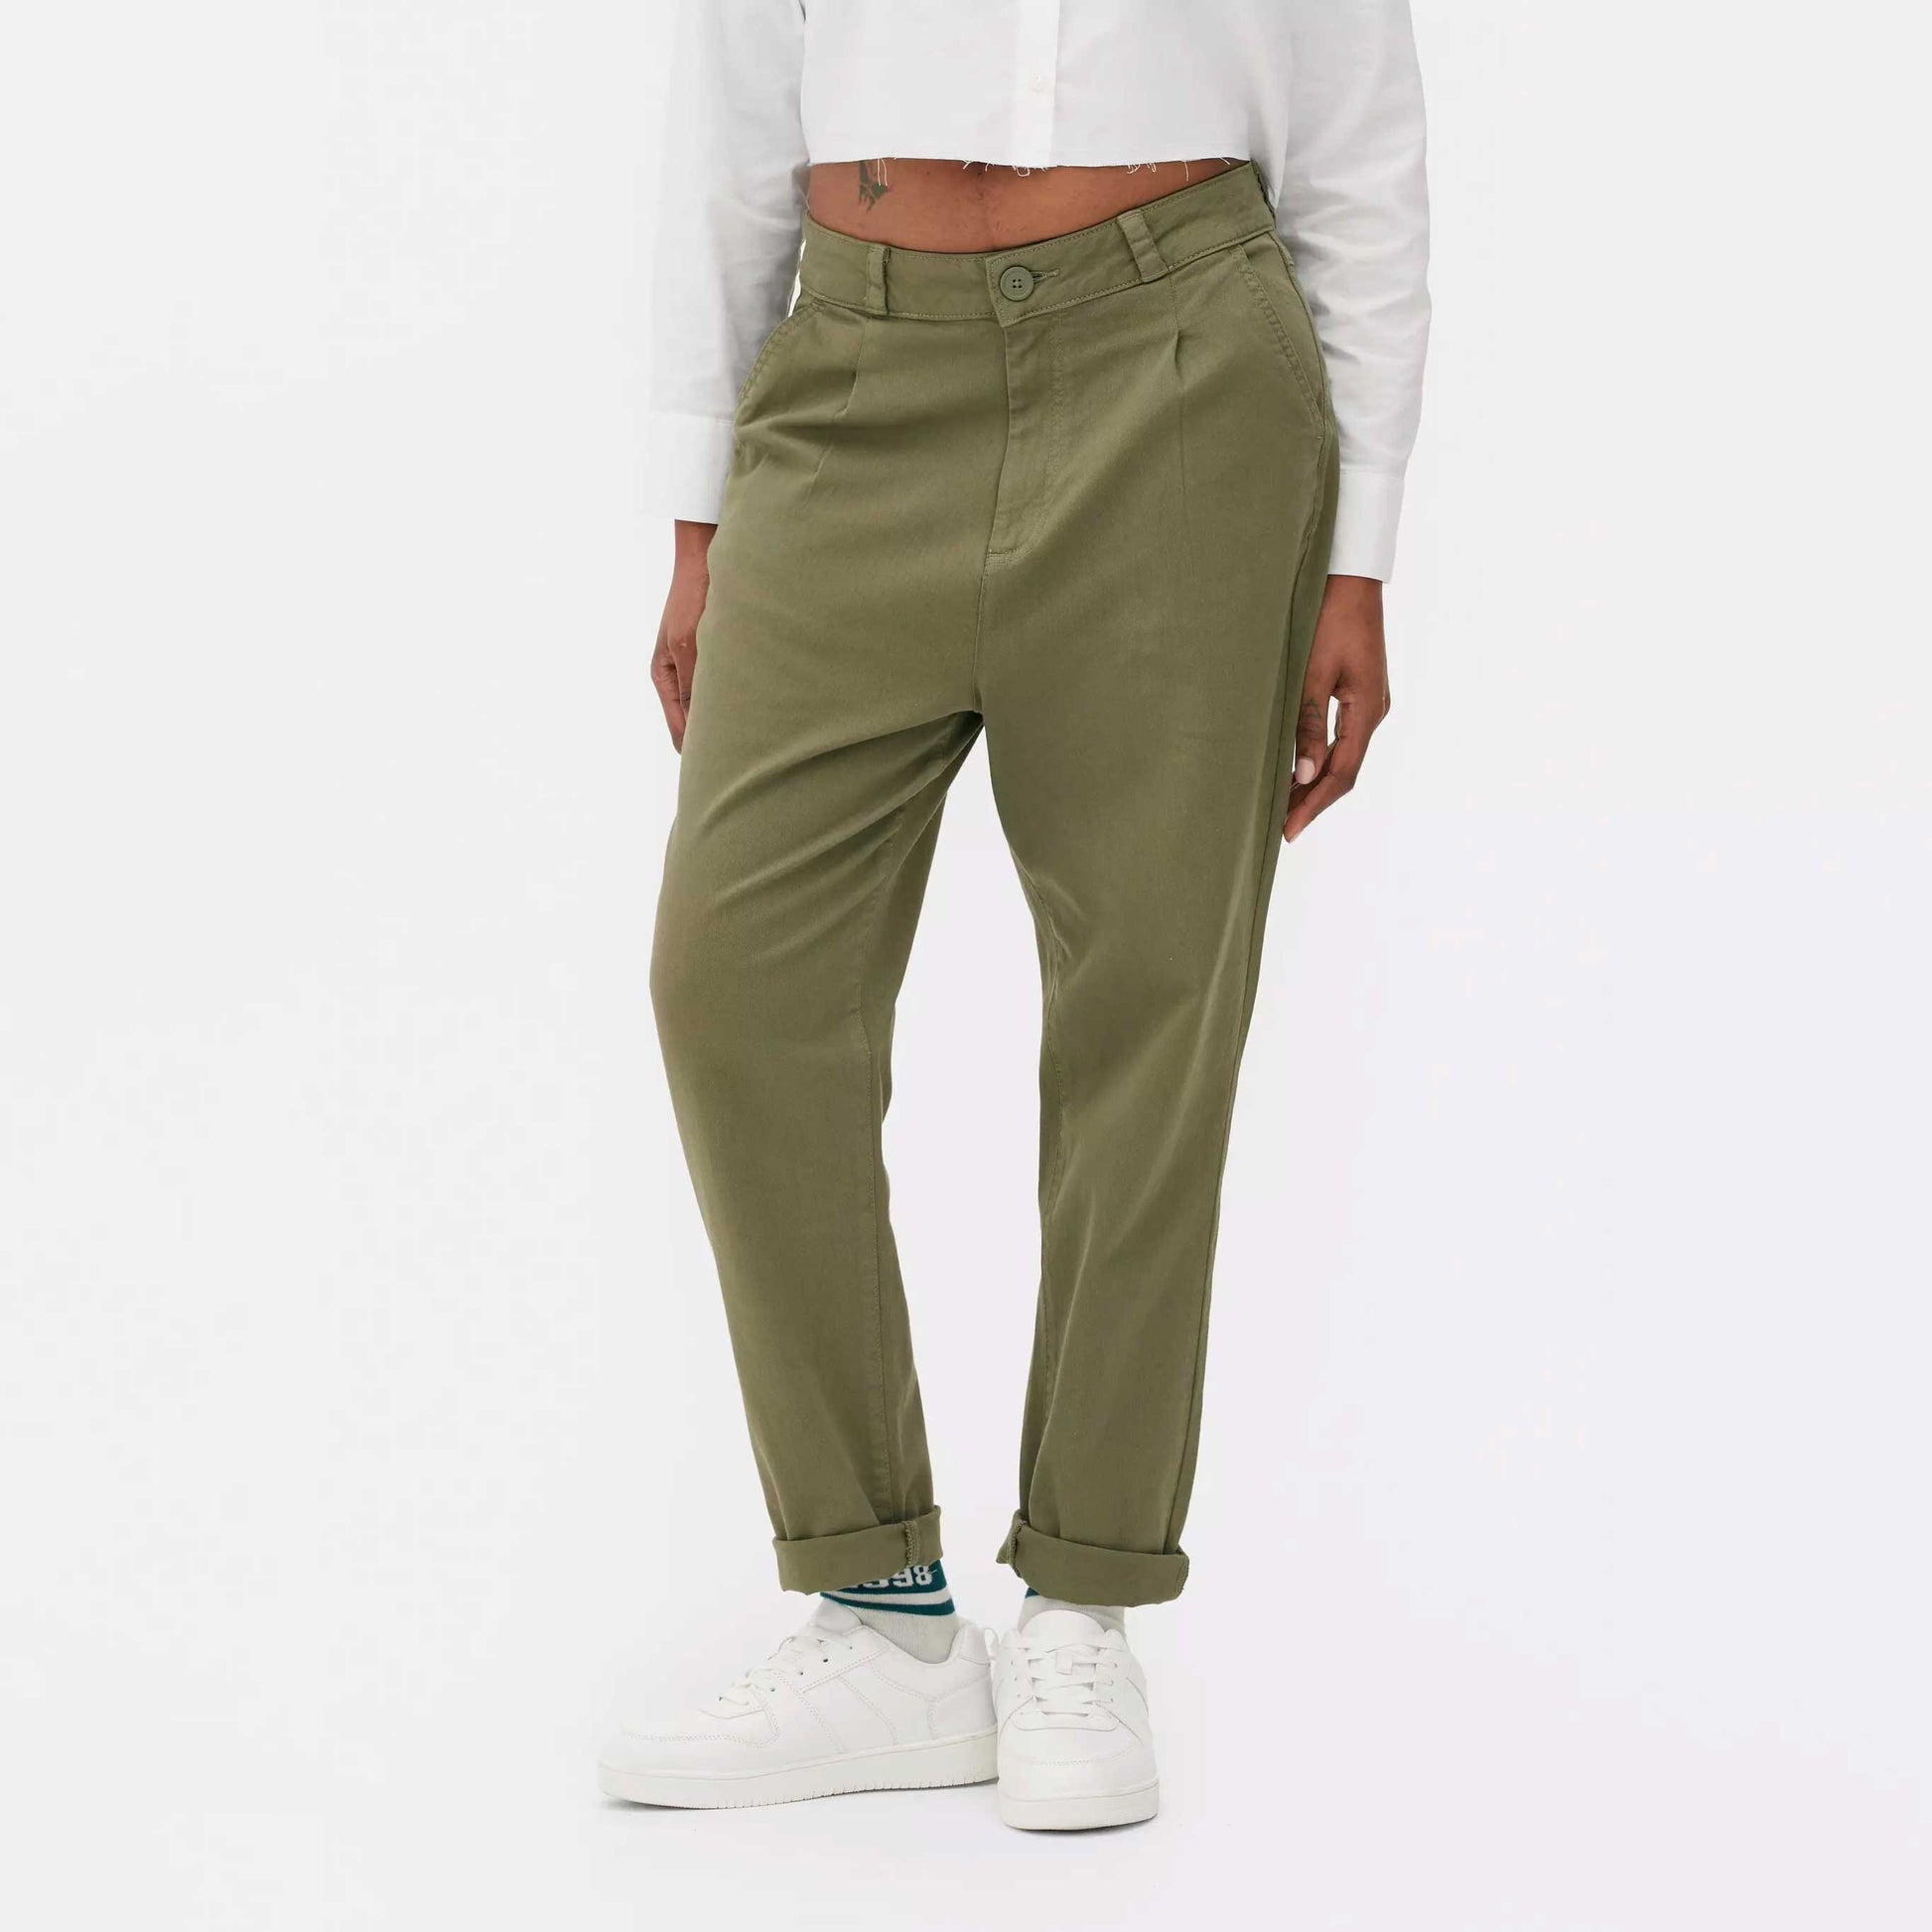 Women's High Rise Mom Fit Straight Fit Minor Fault Pants Women's Denim SNR Olive 24 28